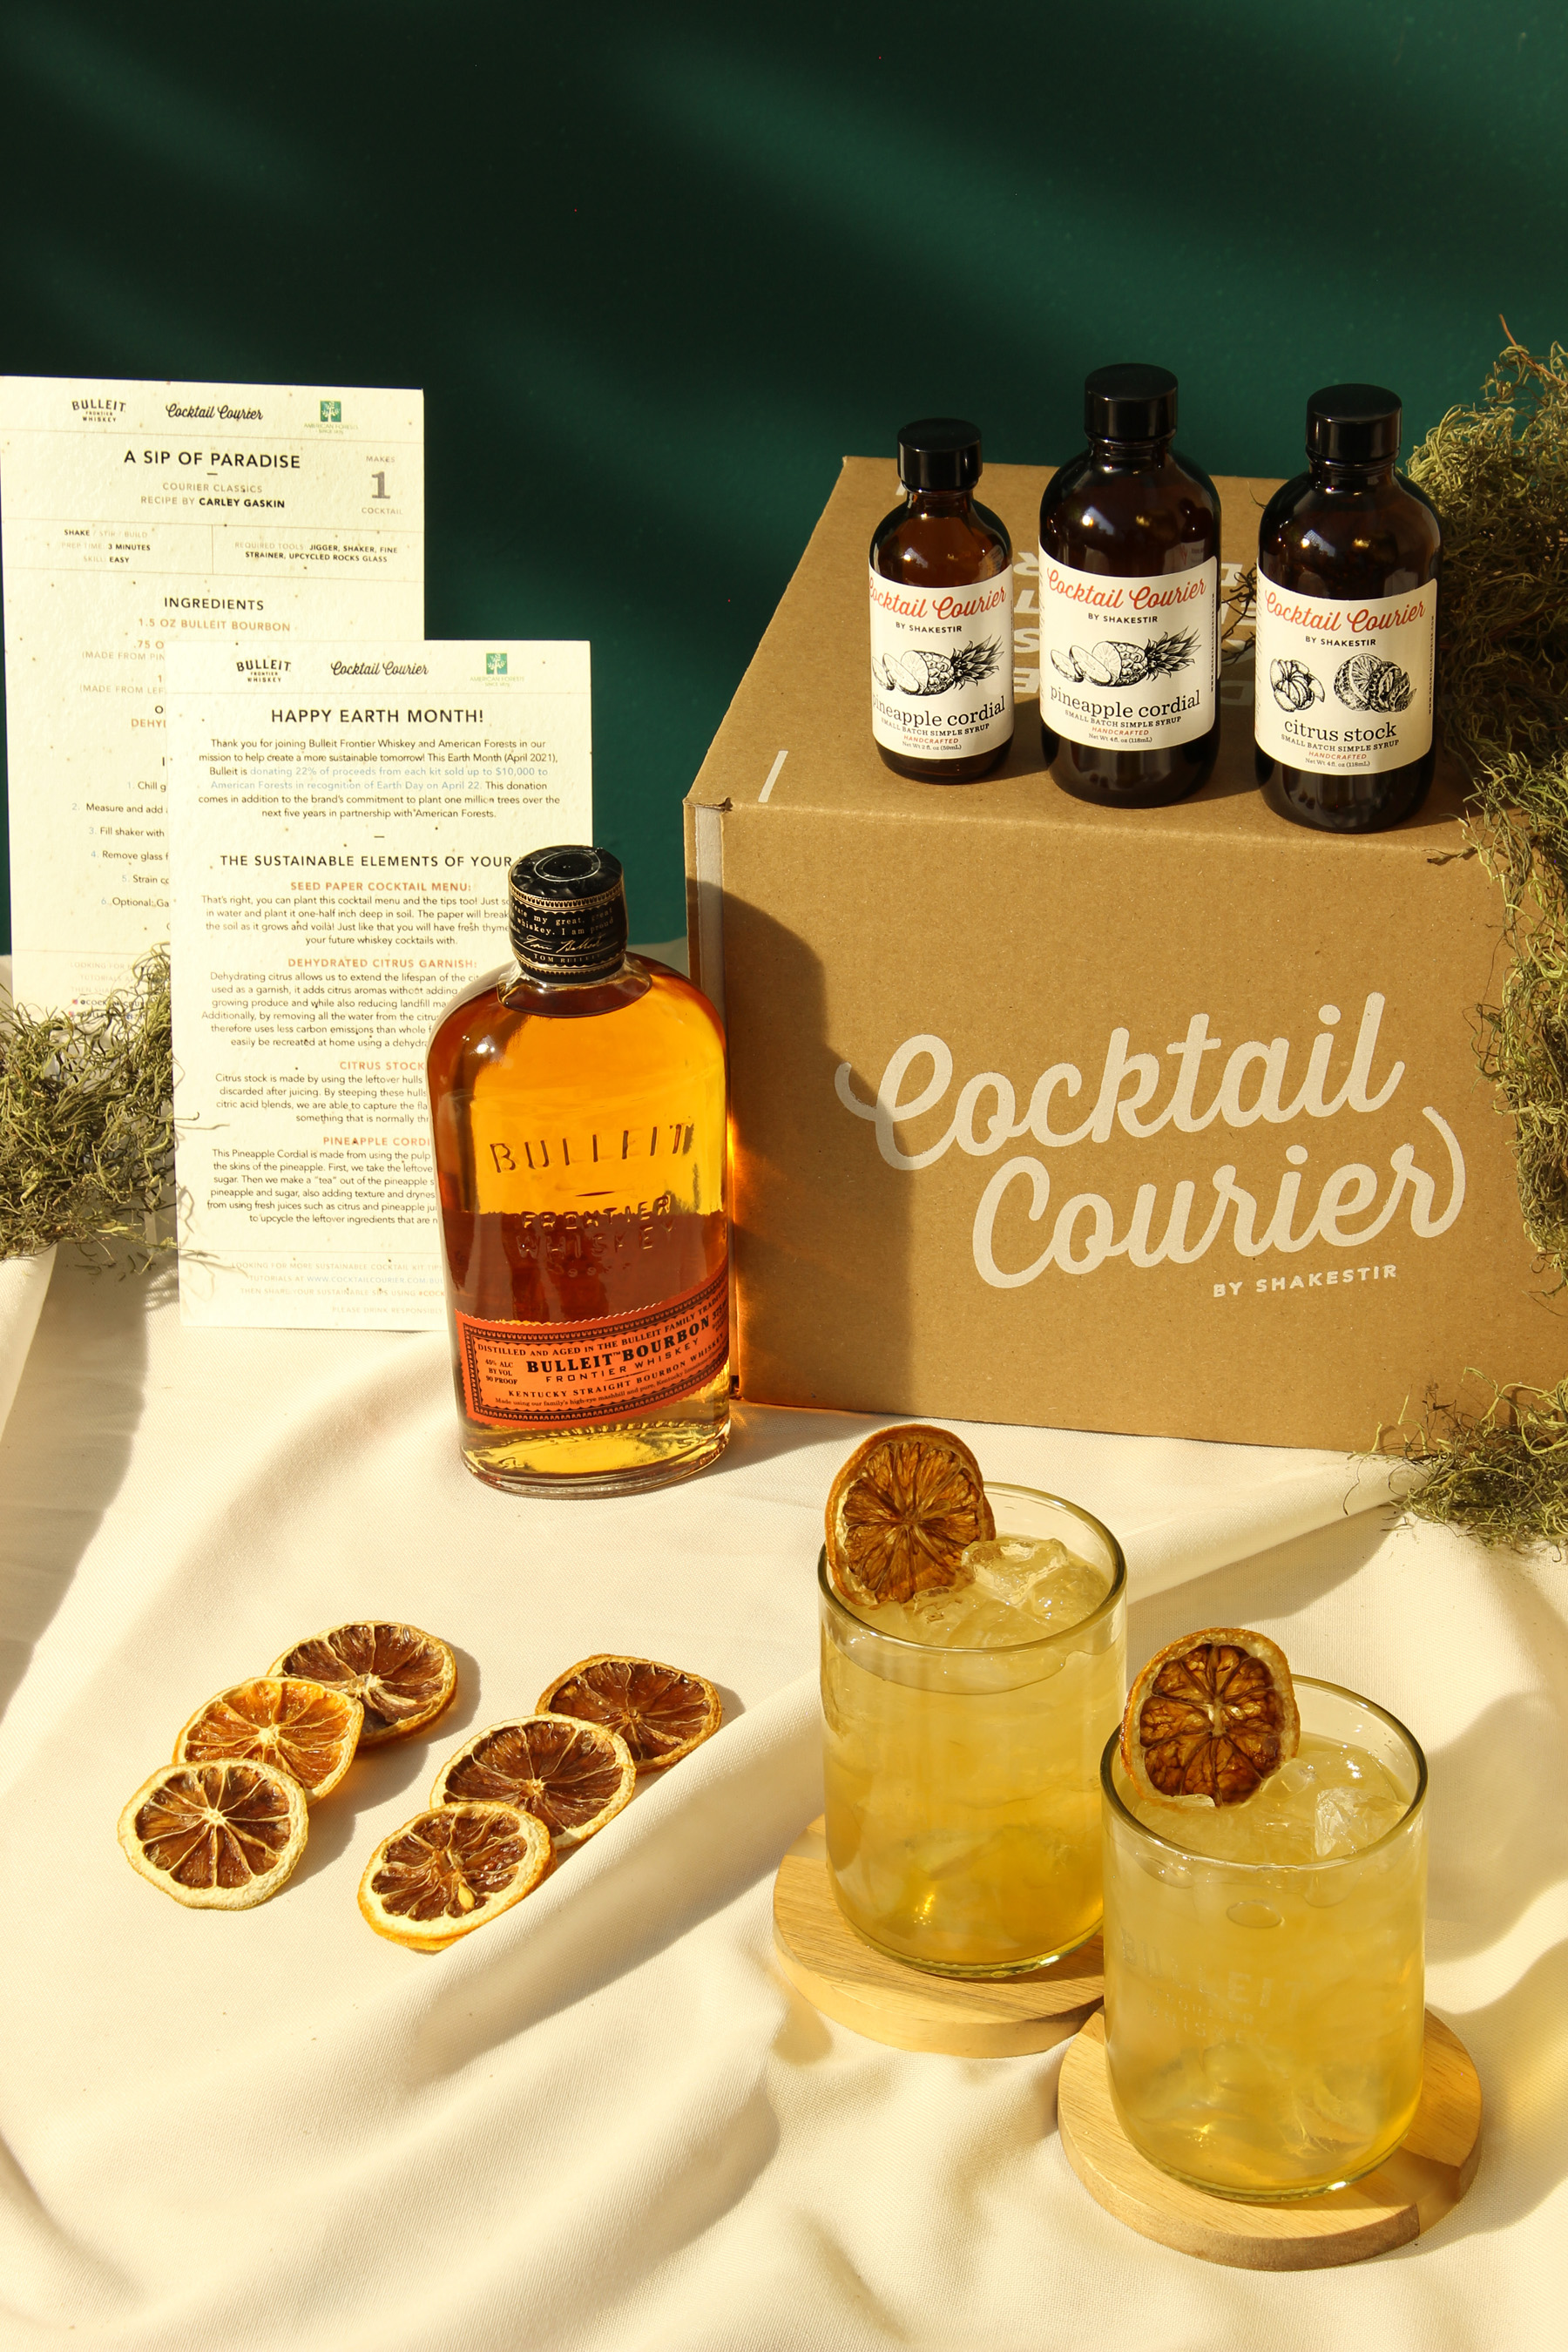 THIS APRIL BULLEIT FRONTIER WHISKEY HAS TEAMED UP WITH AMERICAN FORESTS AND COCKTAIL COURIER TO CREATE A LIMITED-EDITION ECO-FRIENDLY COCKTAIL KIT IN CELEBRATION OF EARTH MONTH AND EARTH DAY ON APRIL 22.